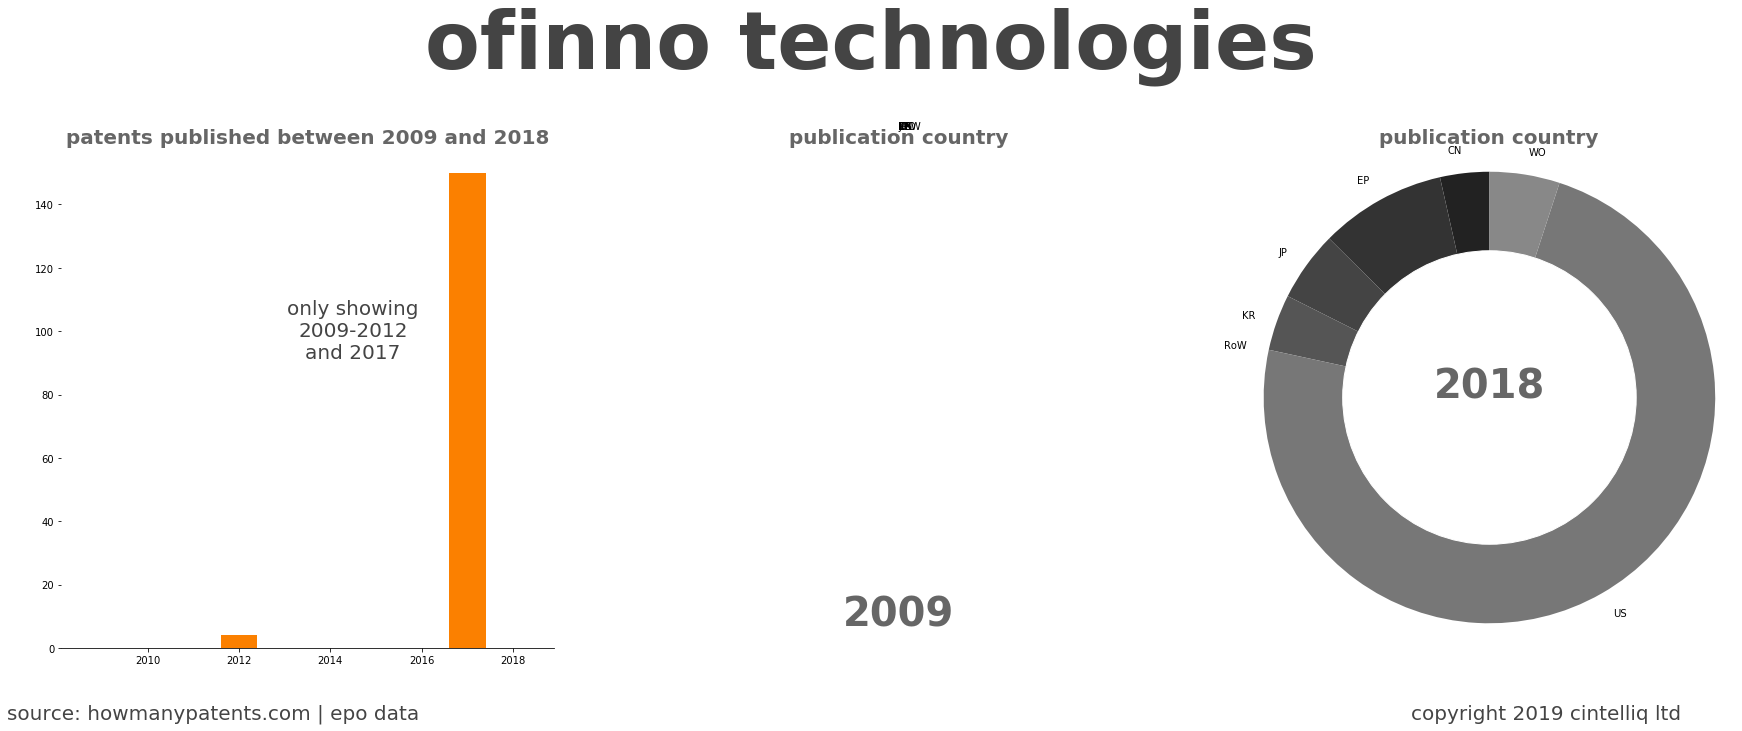 summary of patents for Ofinno Technologies